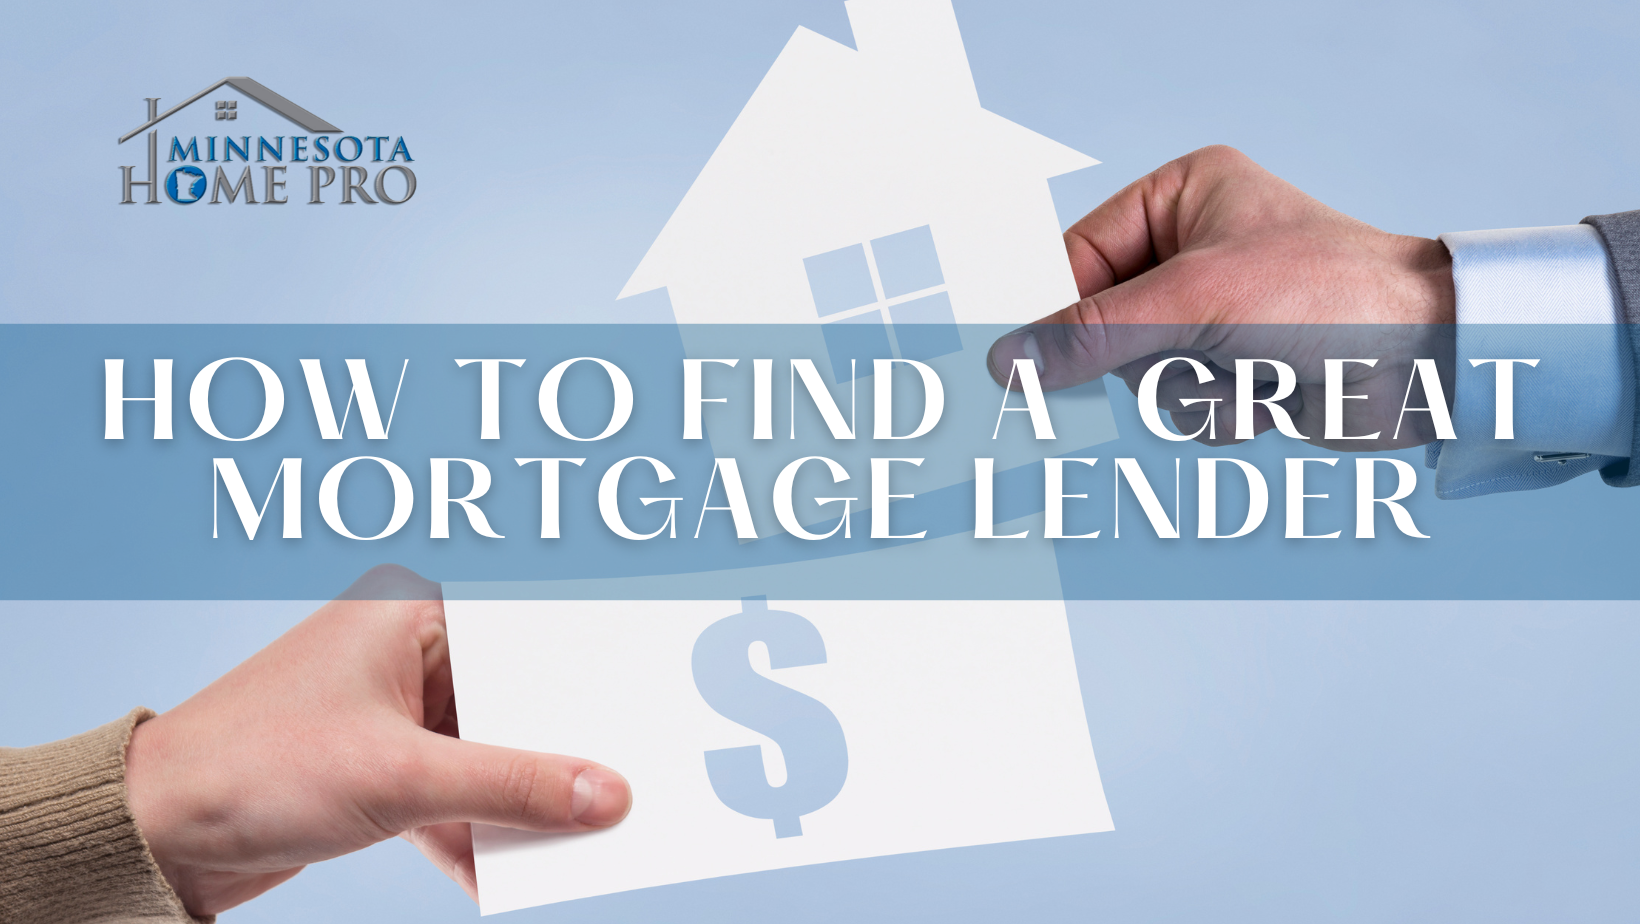 Tips to Finding a Great Mortgage Lender